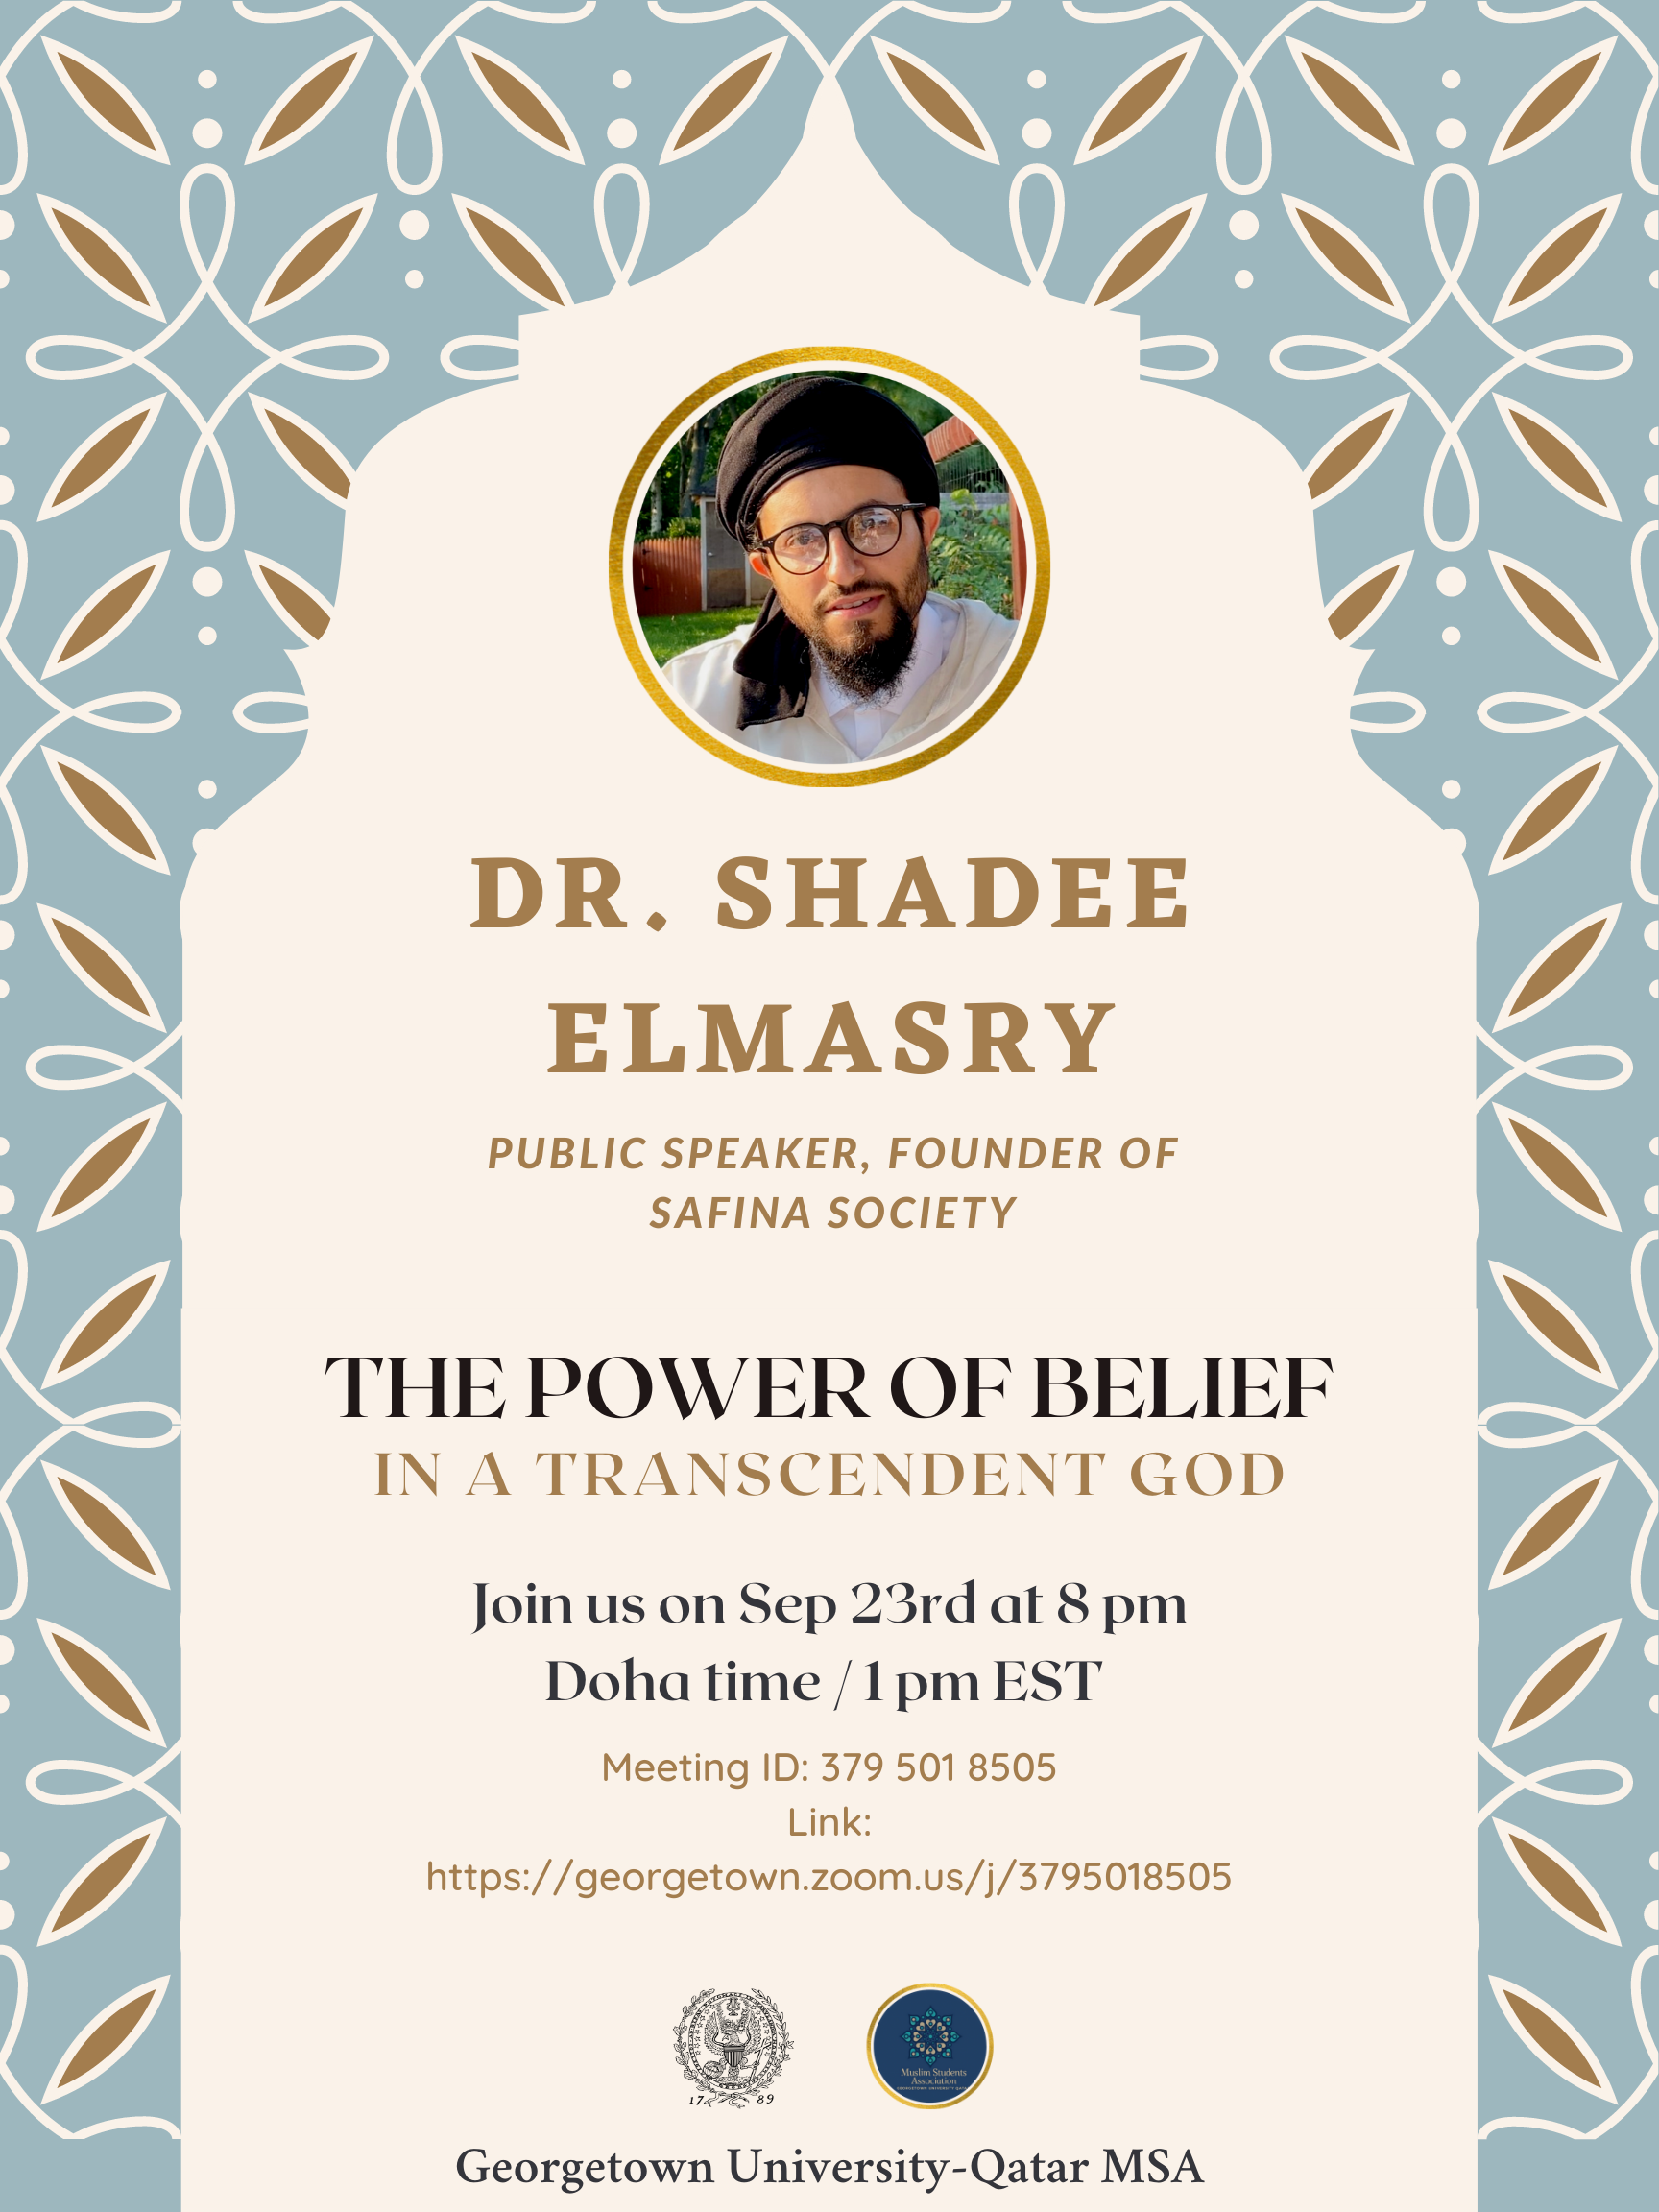 The Power of Belief event poster